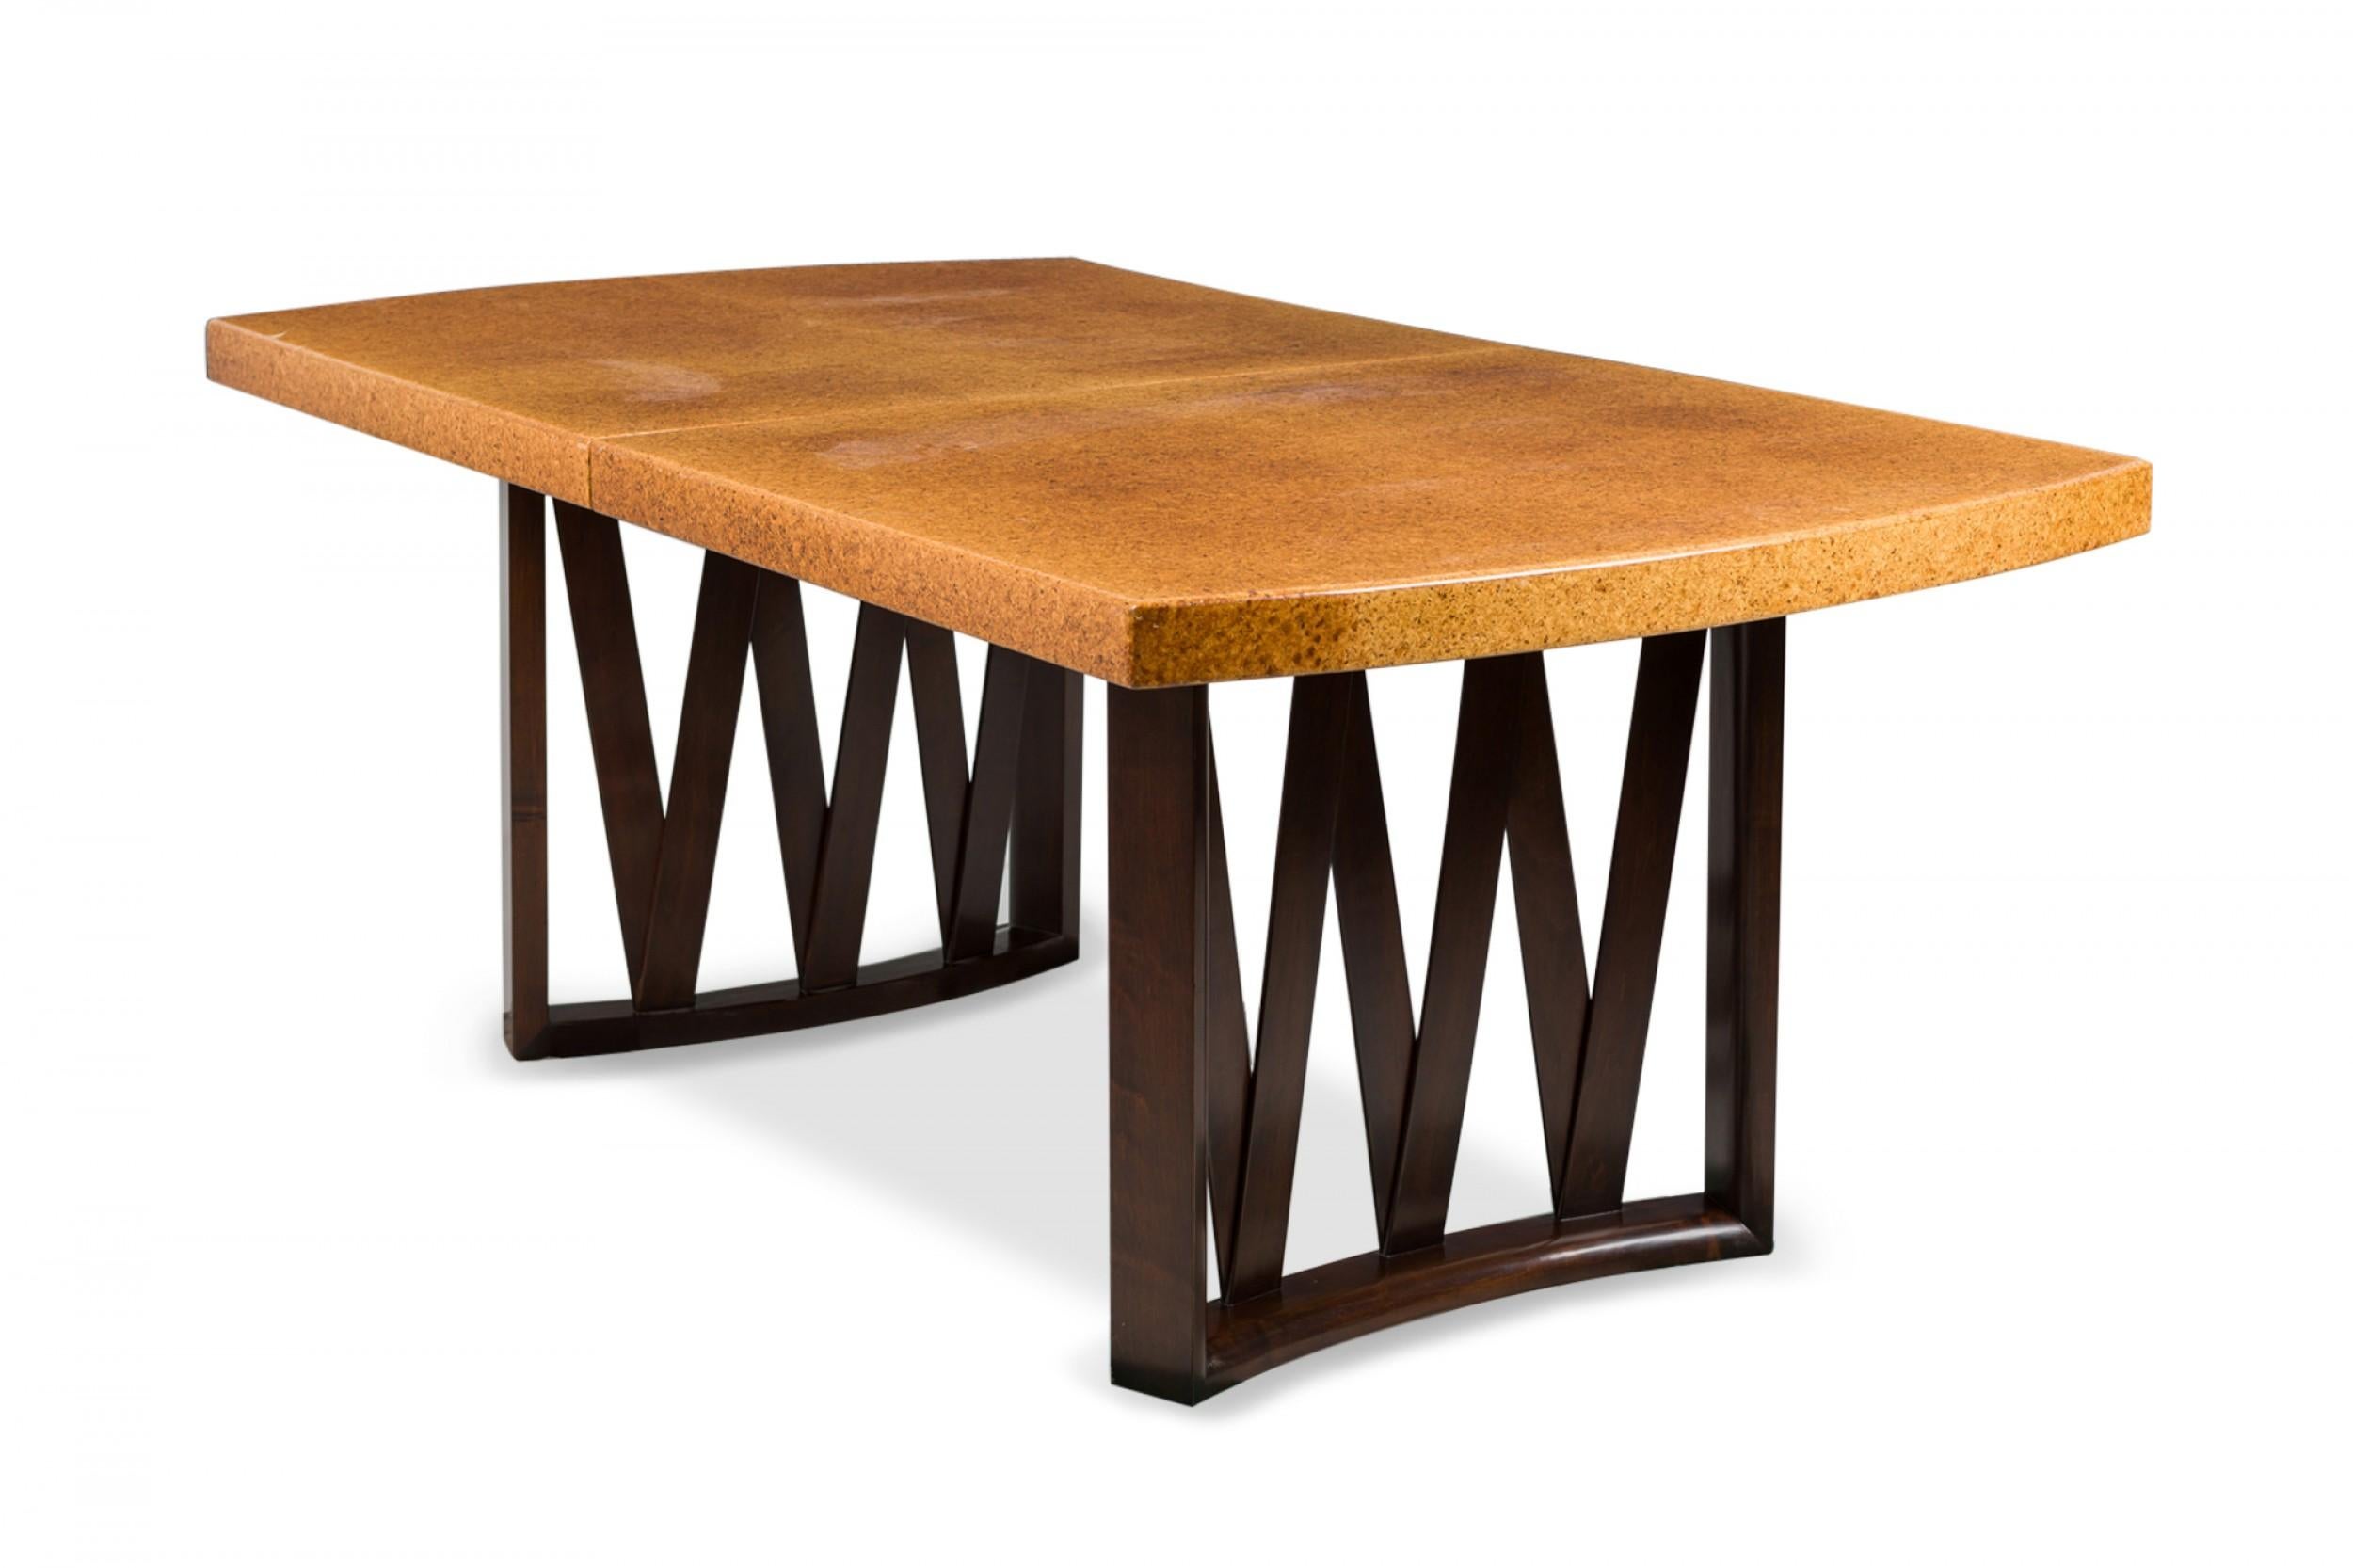 American Mid-Century dining / conference table with a rounded rectangular cork top with two removable leaves, resting on two dark-stained wooden legs with V-shaped central supports. (PAUL FRANKL FOR JOHNSON FURNITURE COMPANY)
